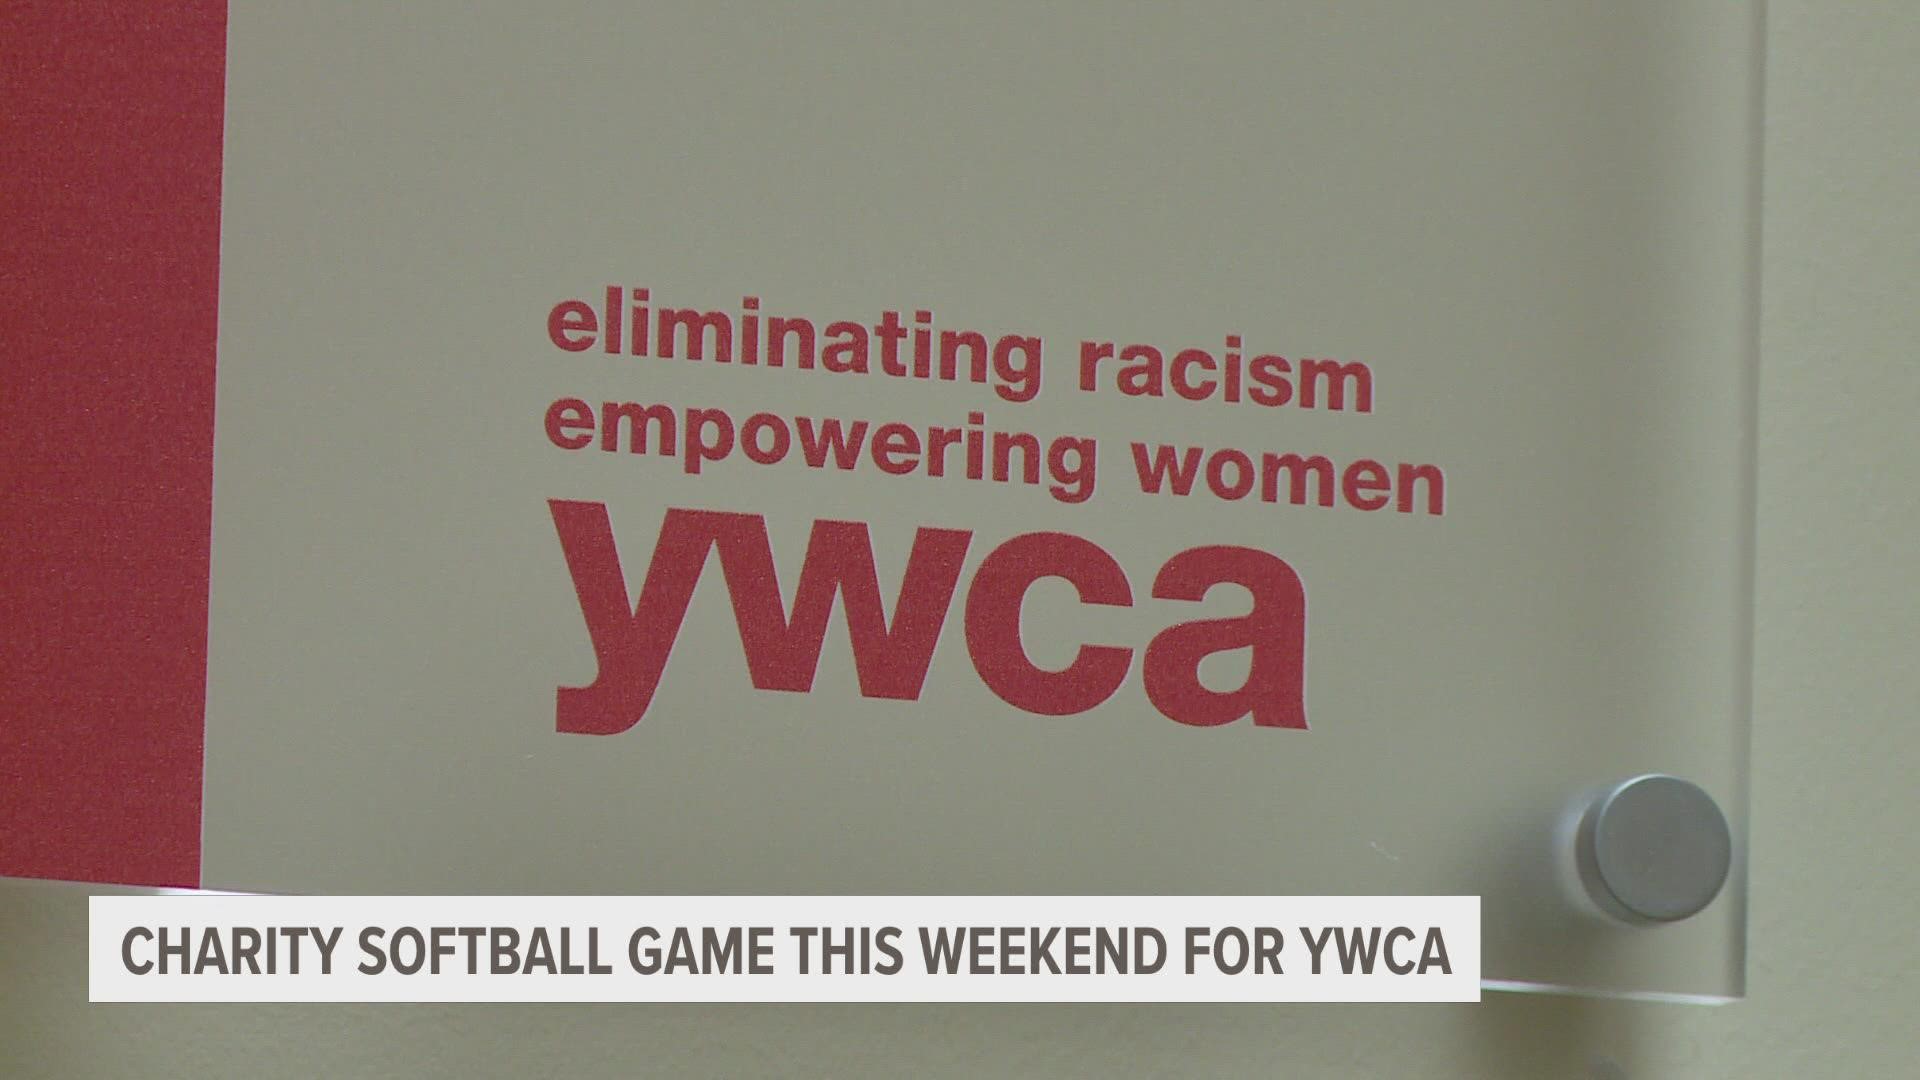 More than $215,000 has been raised for the YWCA's domestic and sexual violence services since 1983.